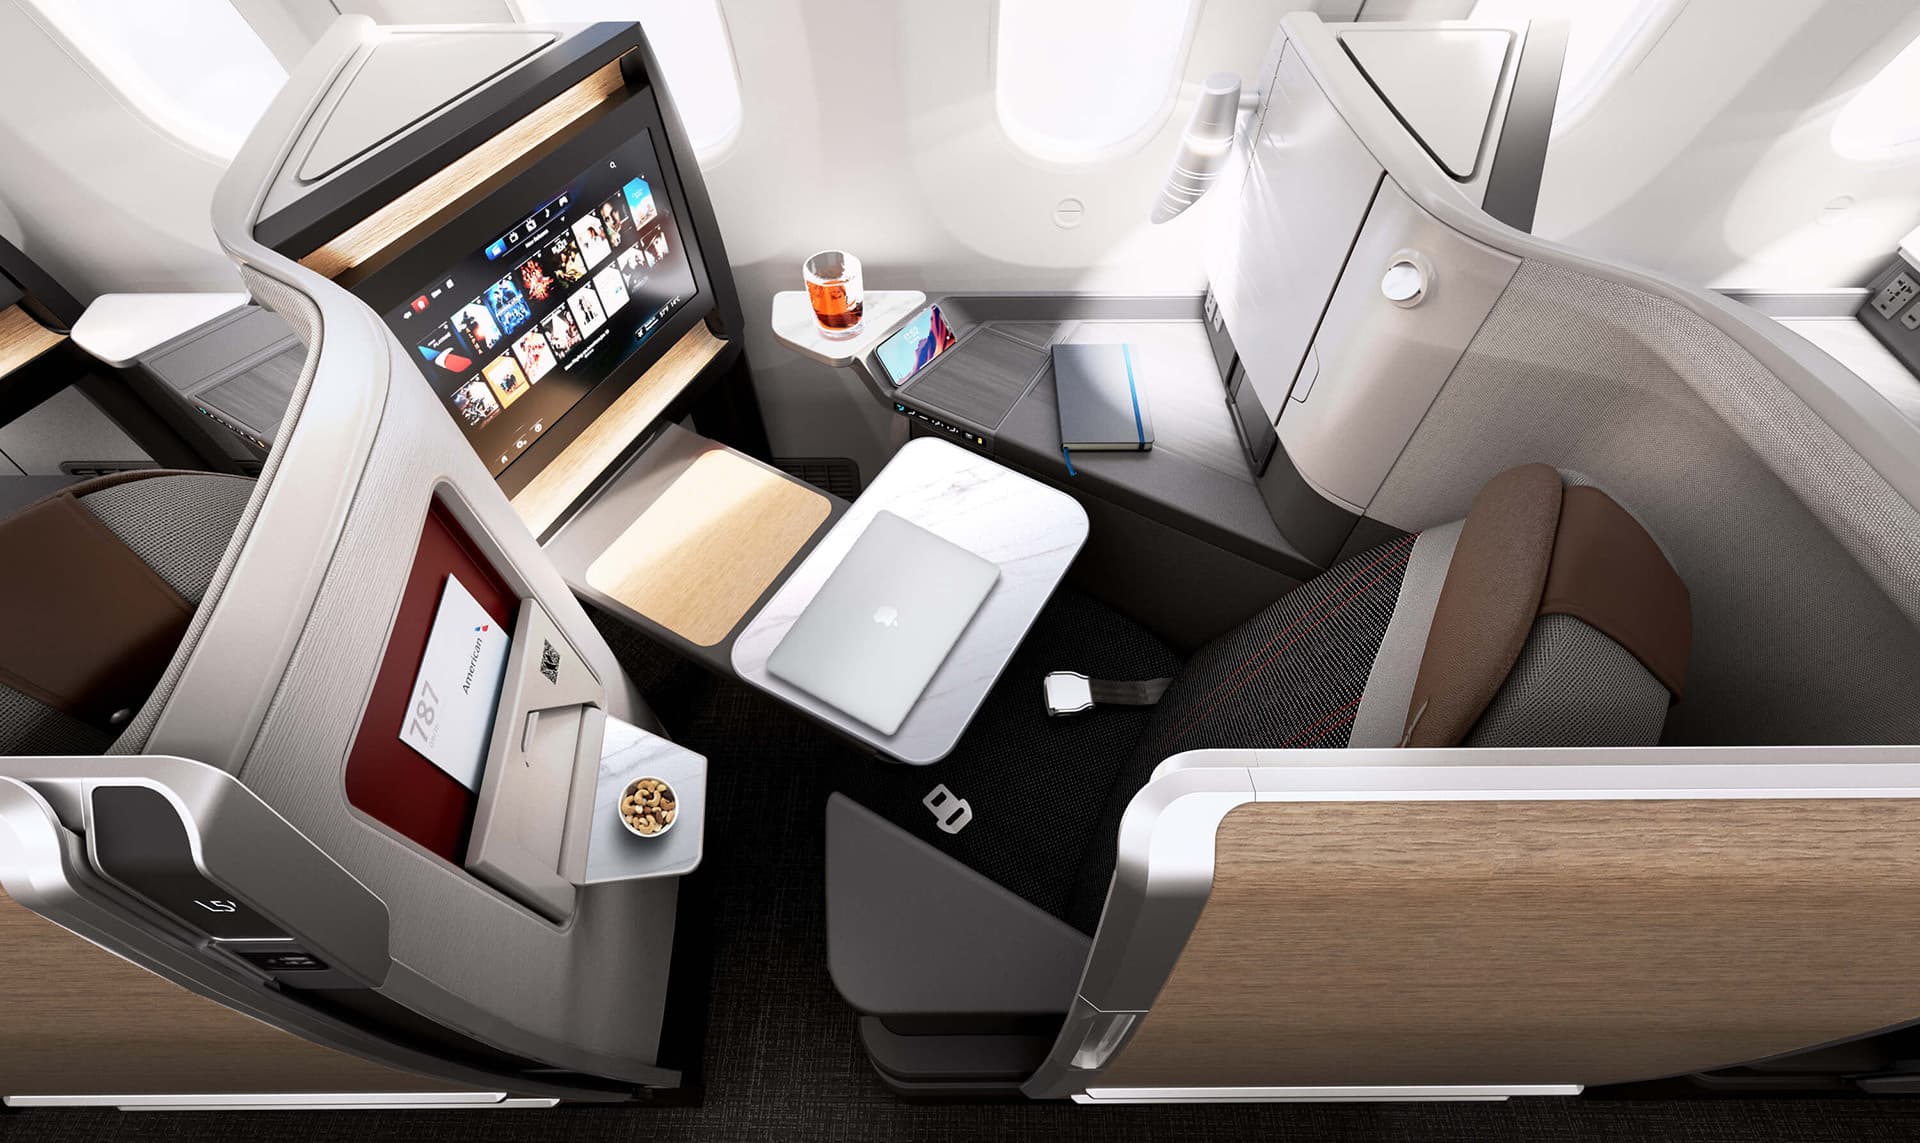 American Airlines B787 Dreamliner Business Class seat with tray table down and a selection of movies on seat back screen